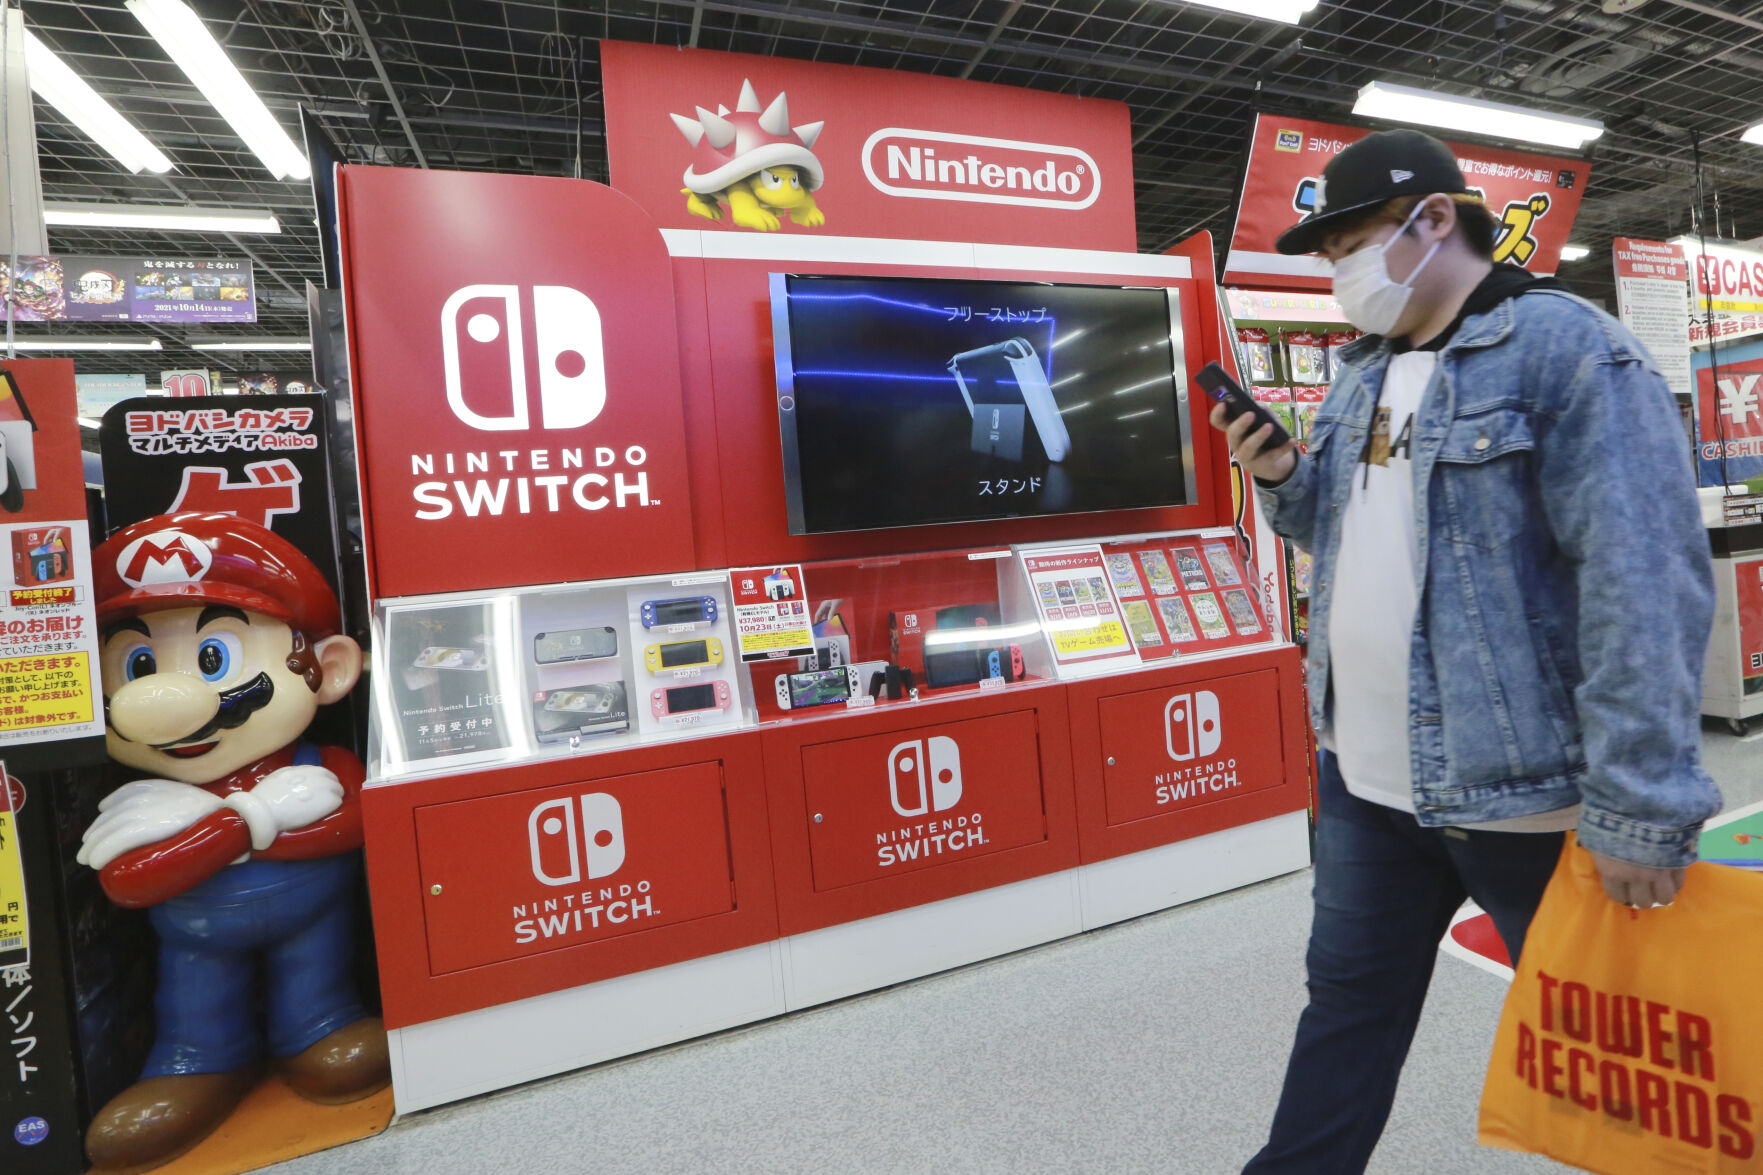 <p>A man walks an advertisement of Nintendo Switch at an electronics retail chain store in Tokyo on Oct. 13, 2021. Japanese video game maker Nintendo recorded a 34% surge in fiscal first half profits Tuesday, Nov. 8, 2022, as products for its Switch console like "Splatoon 3," a paint-shooting game, sold well. (AP Photo/Koji Sasahara)</p>   PHOTO CREDIT: Koji Sasahara 